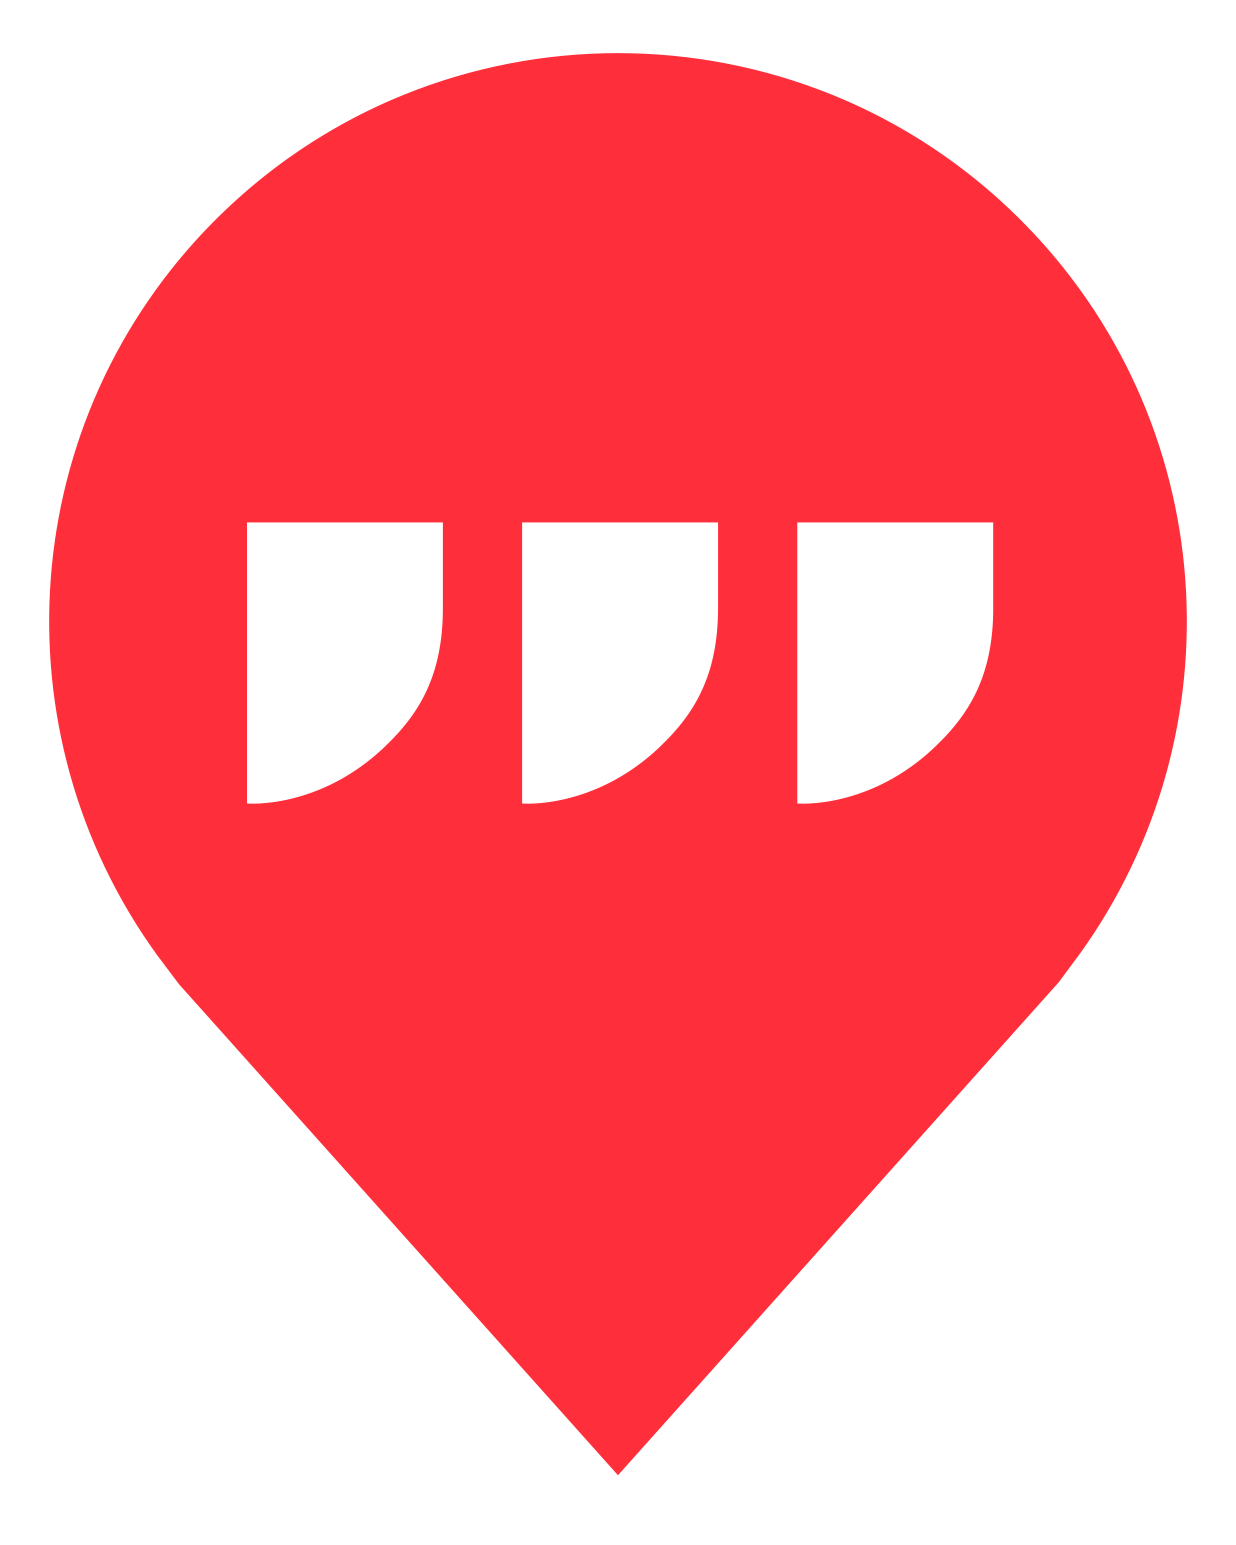 File:What3words Pin and iOS app icon.png - Wikipedia